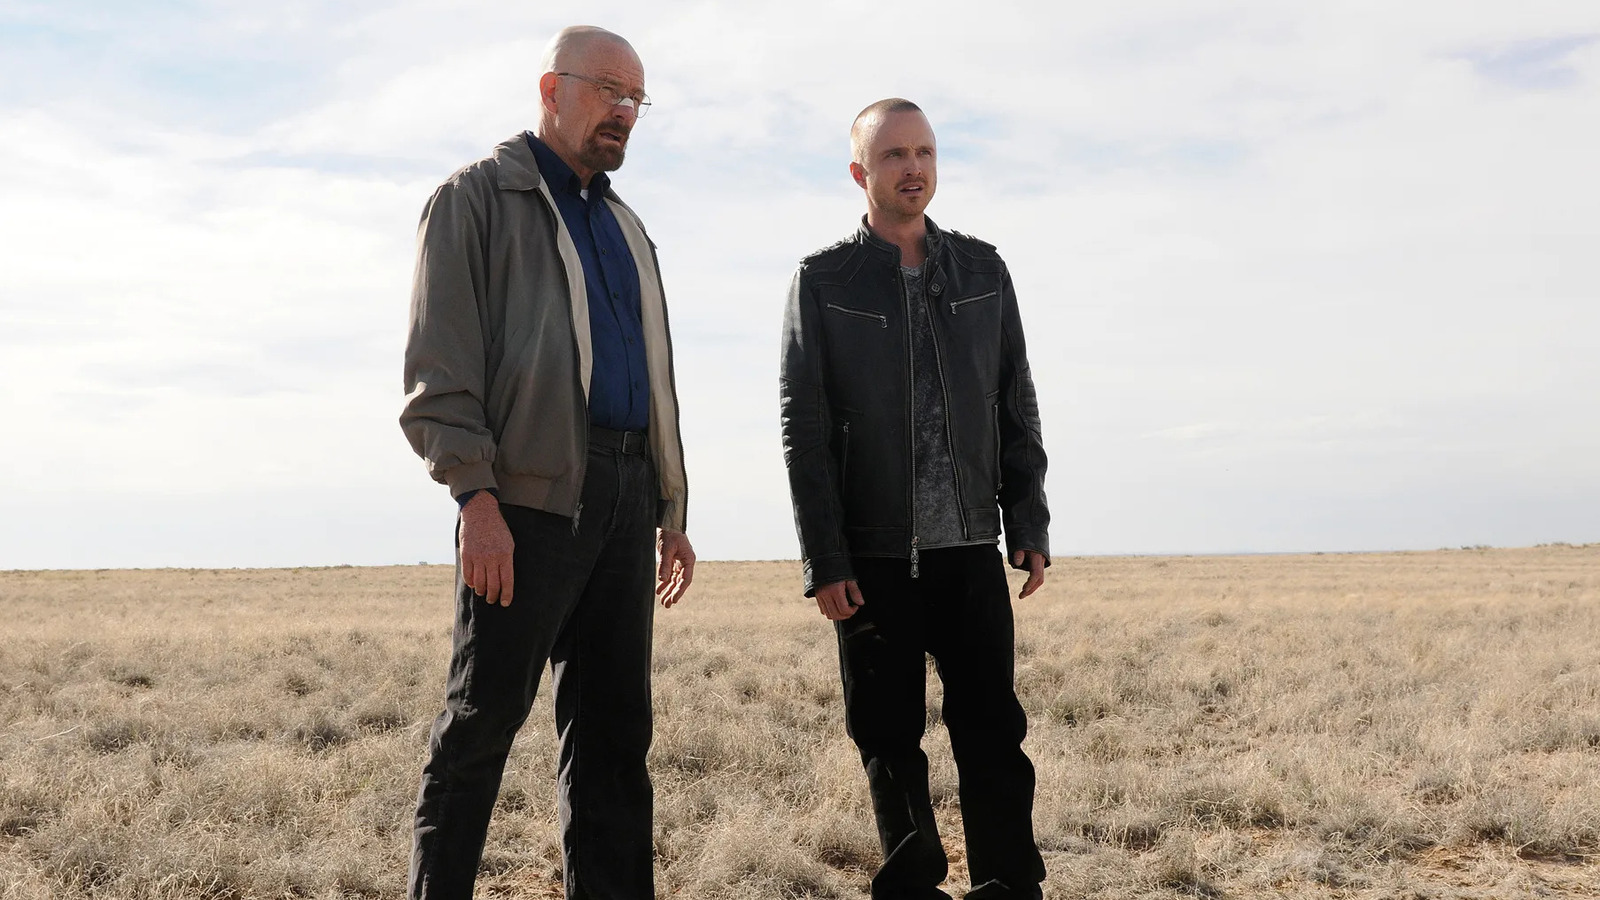 Bryan Cranston Releases Walter White Because It’s Always Sunny In Philadelphia Season 16 Appearance